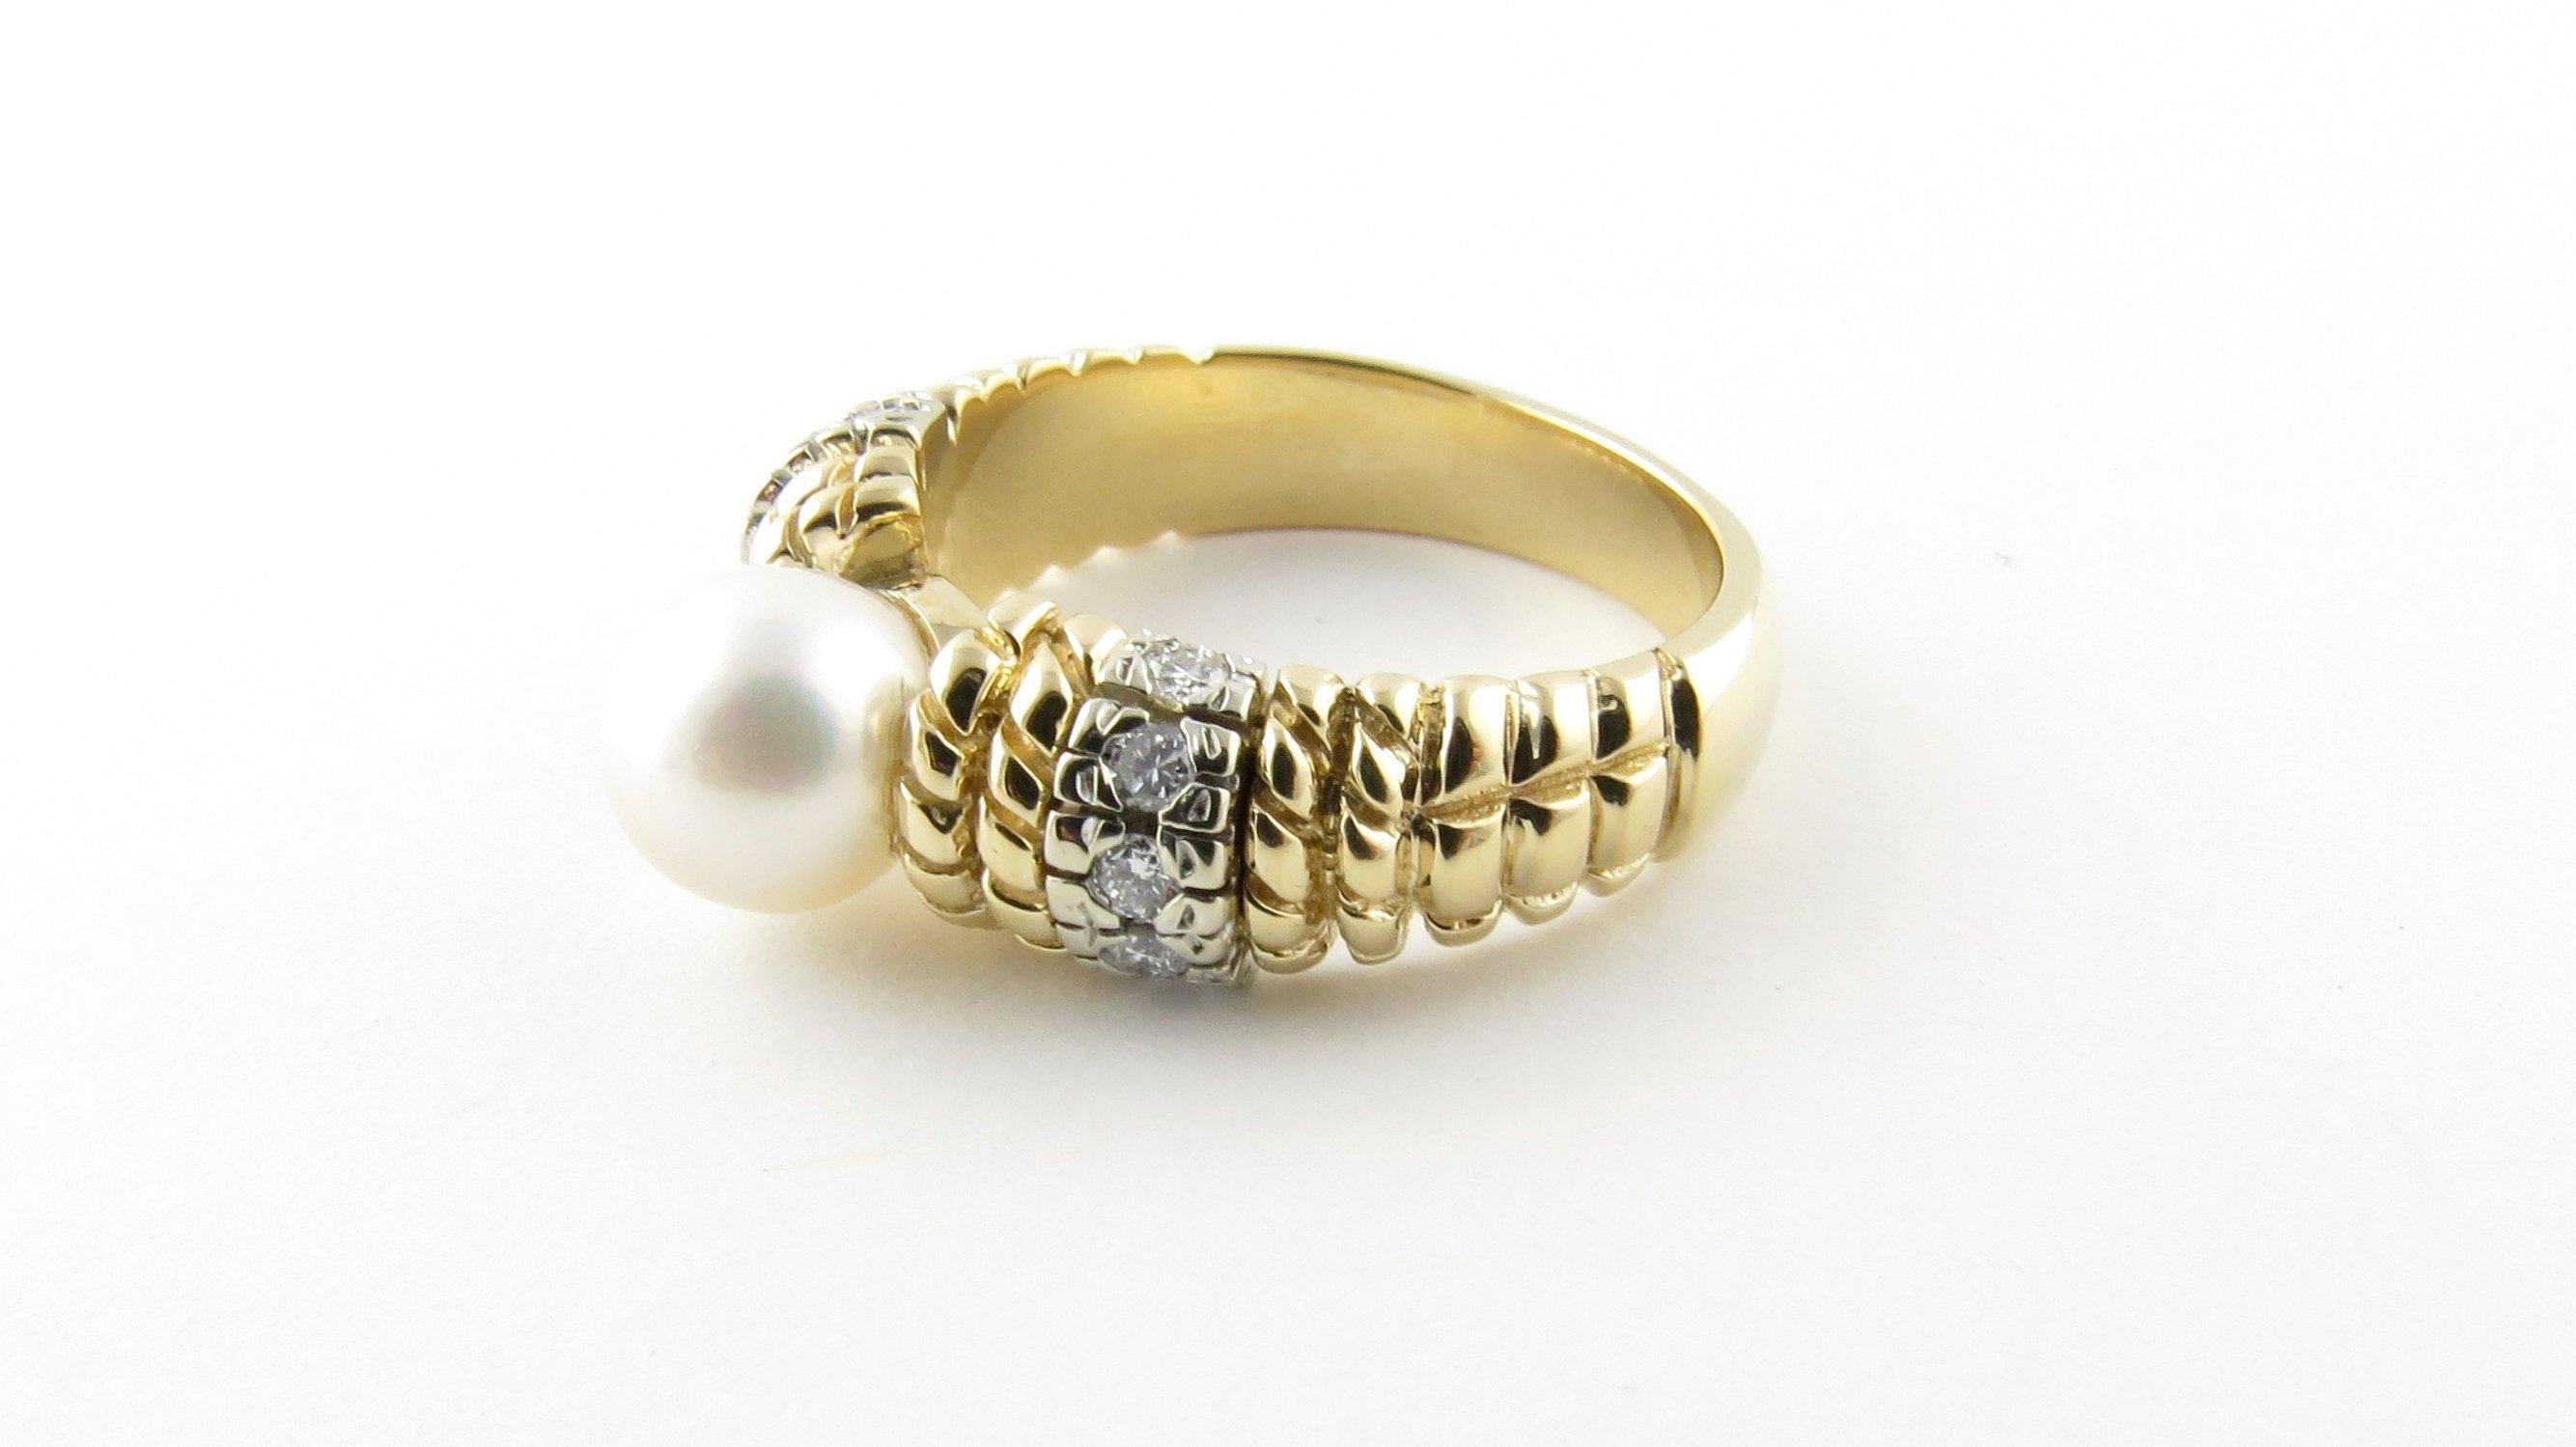 Vintage 14 Karat Yellow Gold Pearl and Diamond Ring Size 7- 
This lovely ring features one white cultured pearl (7 mm) accented with ten round brilliant cut diamonds and set in exquisitely detailed 14K yellow gold. Shank measures 4 mm. 
Approximate